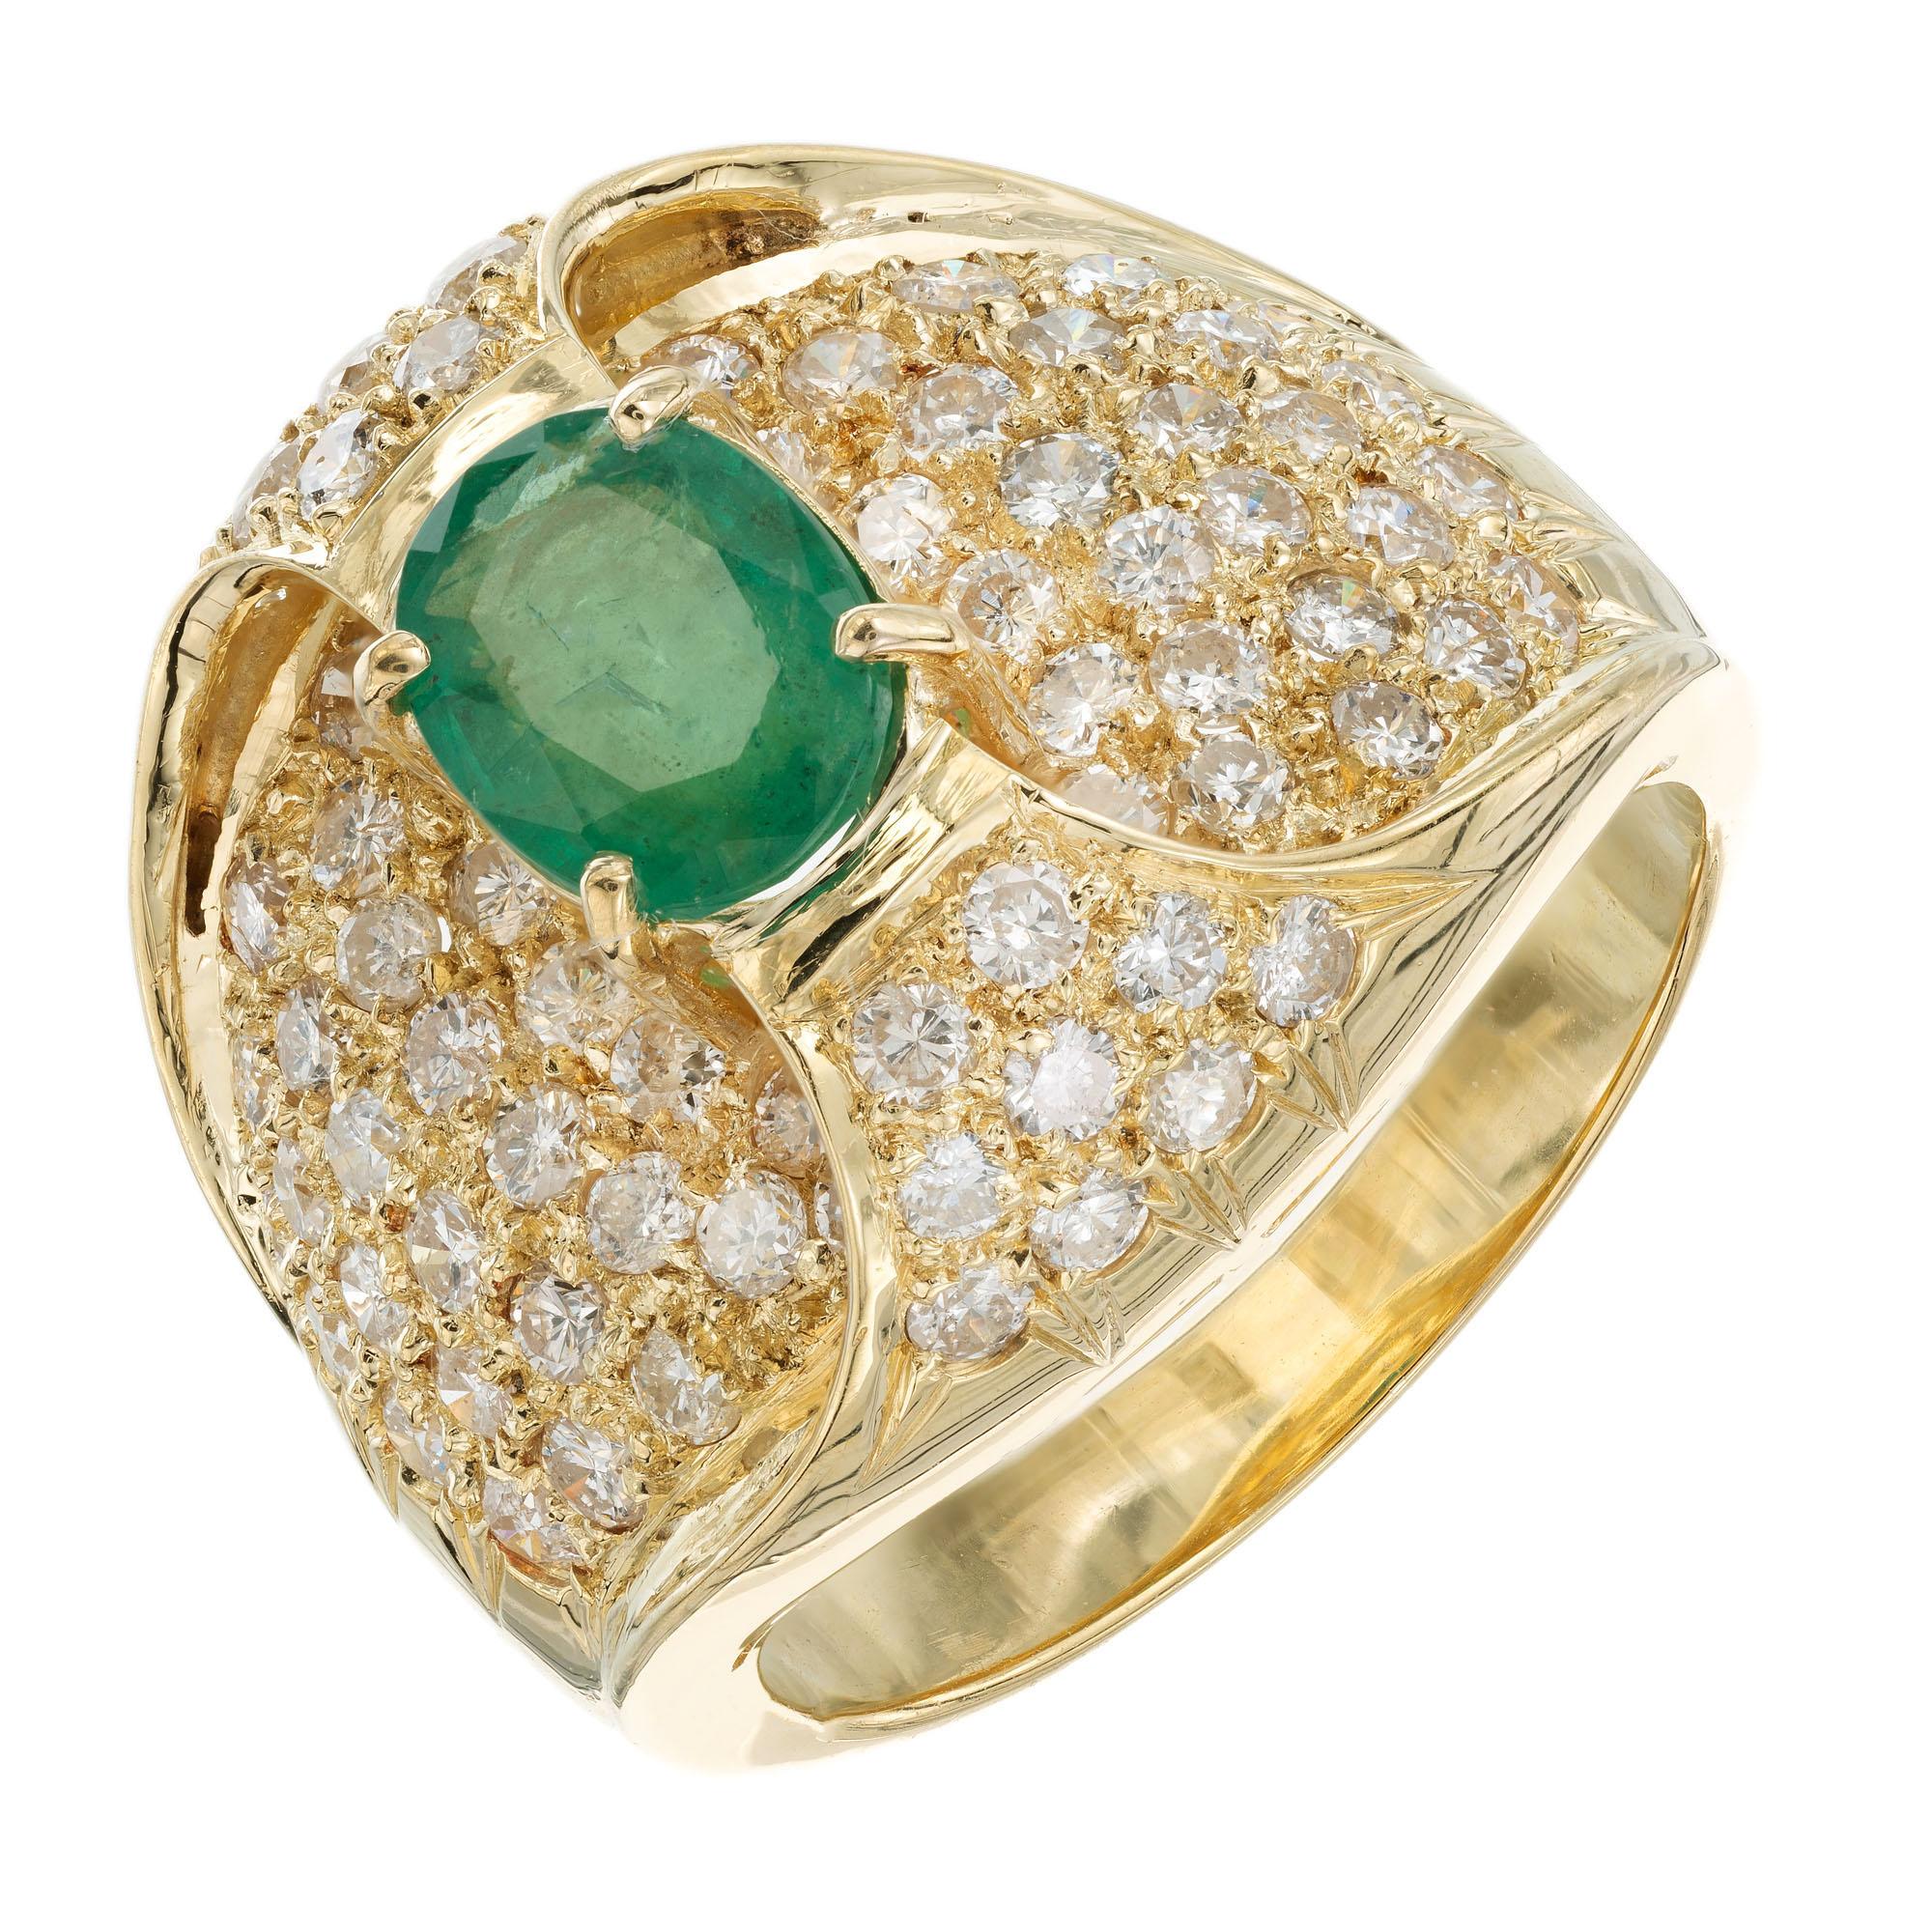 1970’s emerald and diamond cluster cocktail ring. 1.00ct oval emerald center stone set in 18k yellow gold with a cluster of 78 round brilliant cut pave set diamonds. 

1 oval green emerald, MI approx. 1.00
78 round brilliant cut diamonds, G-H SI2-I